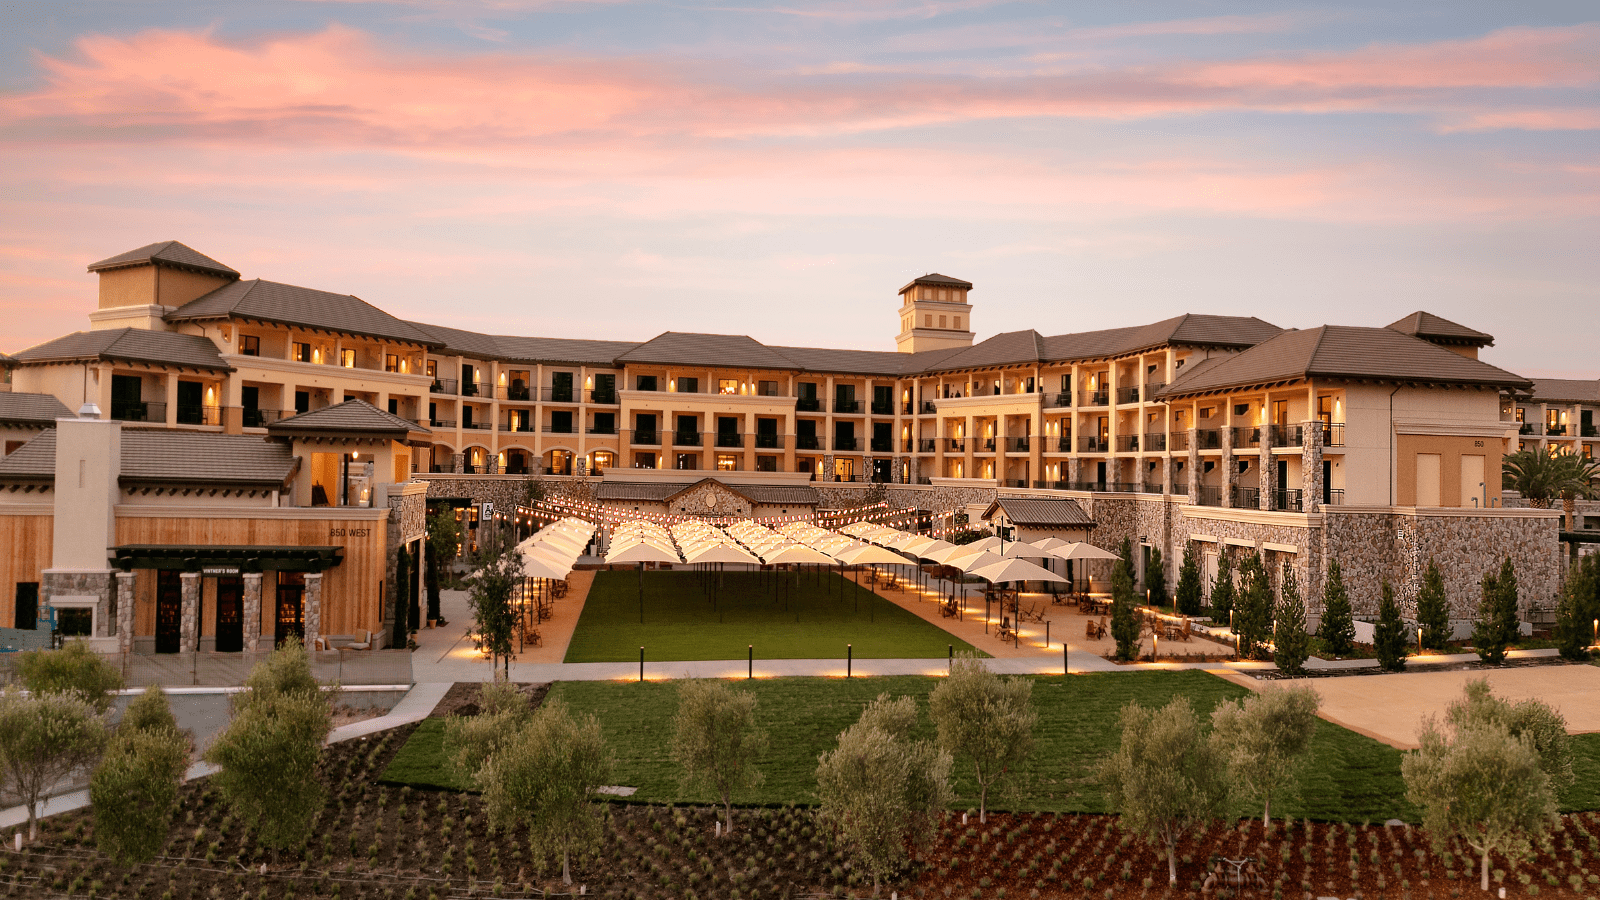 The Meritage Resort and Grand Reserve